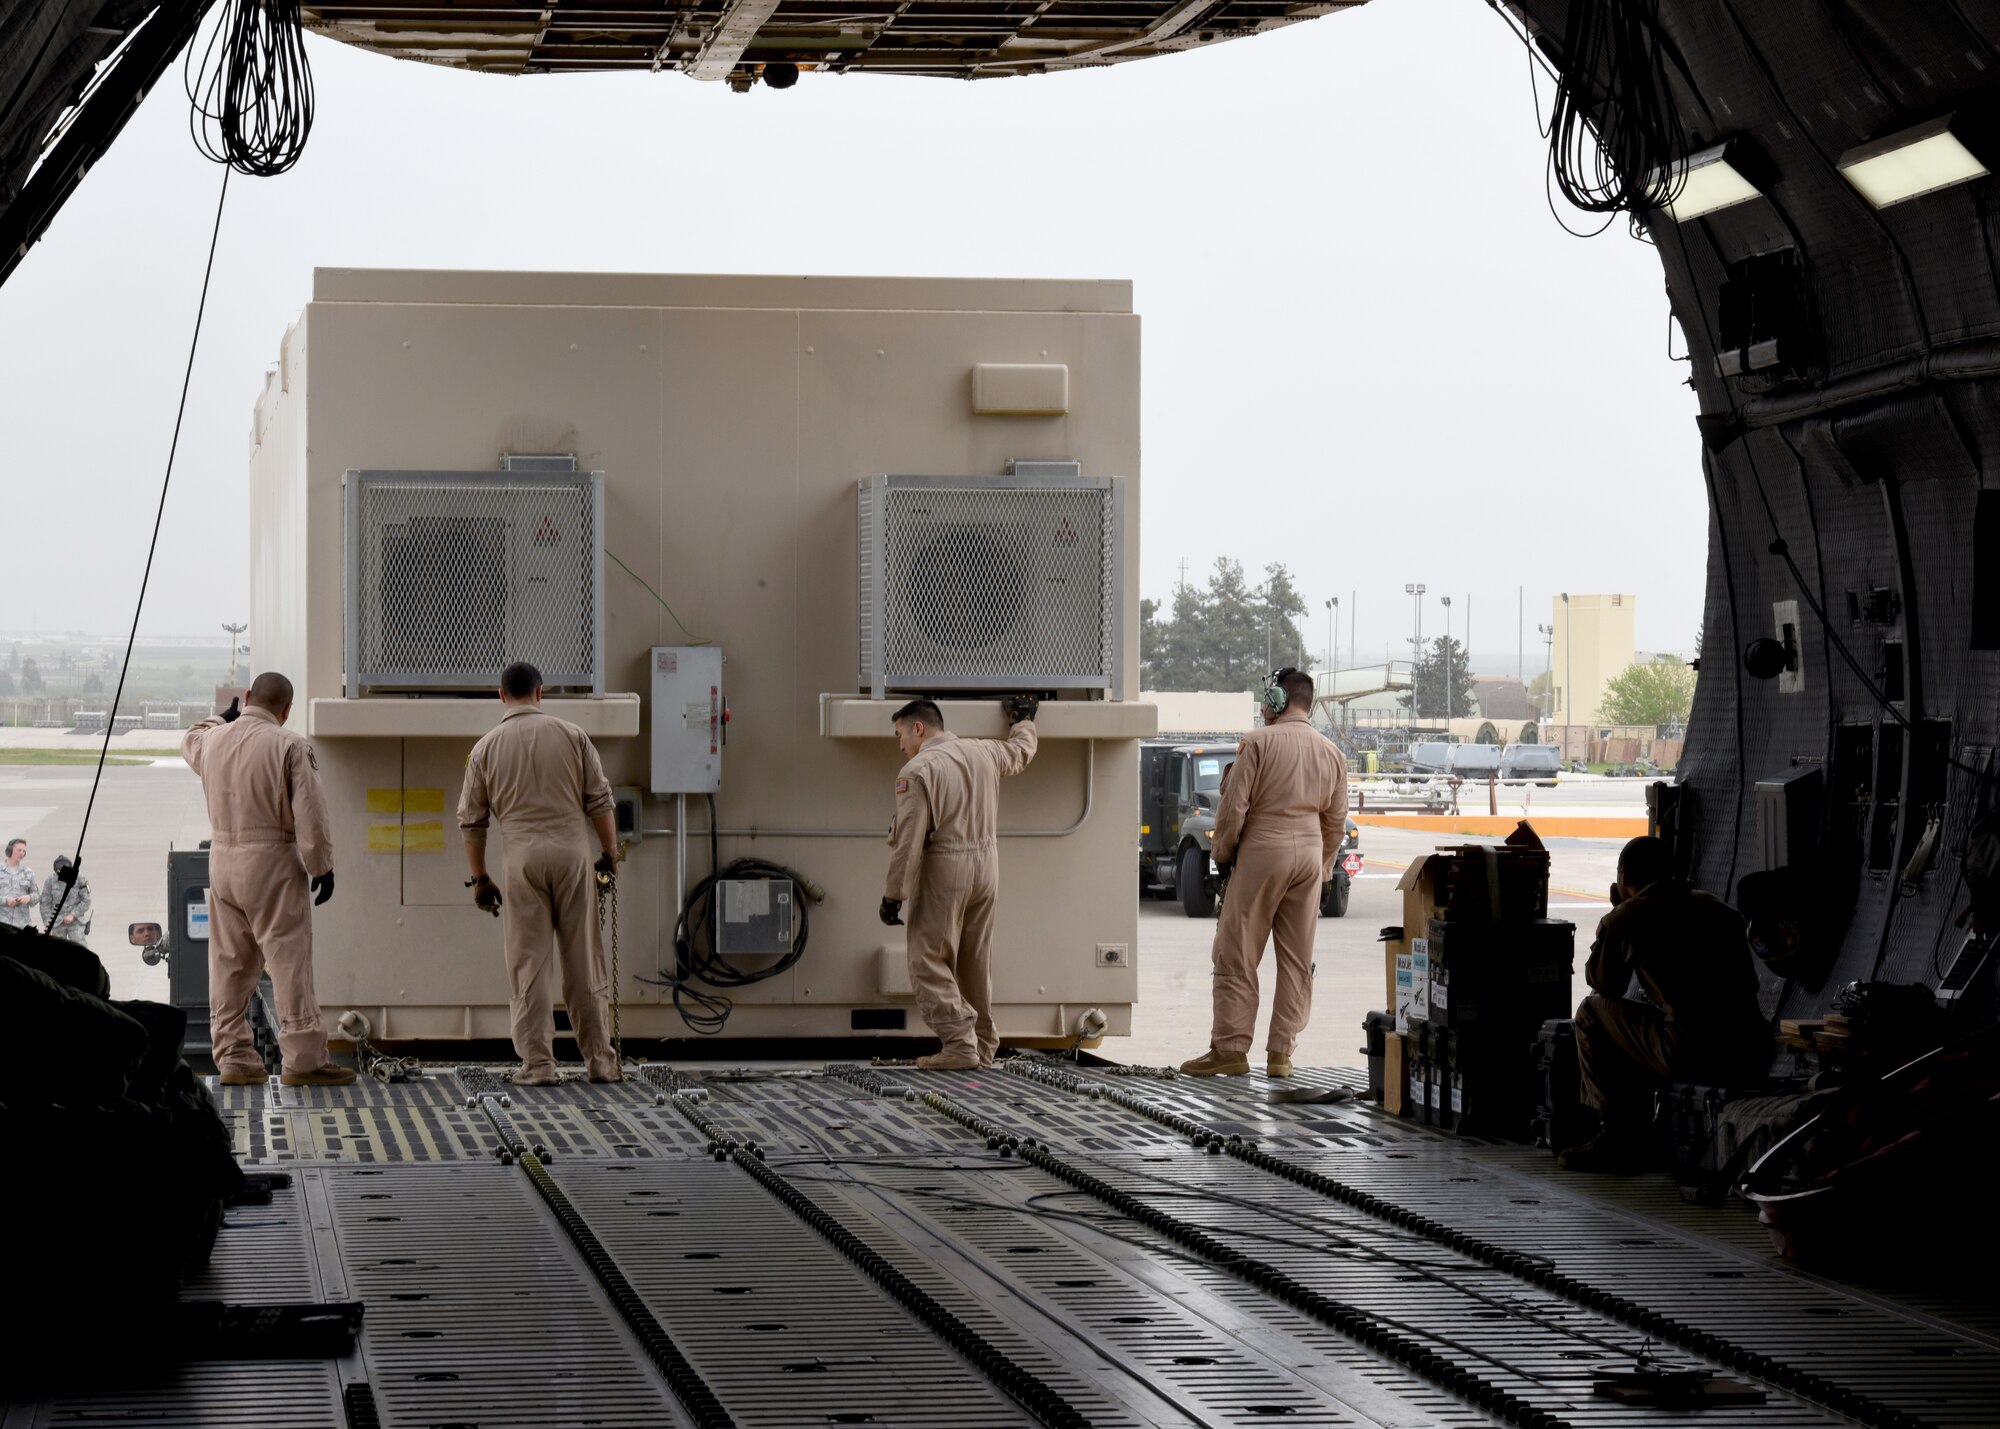 This 78,000 pound deployable shelter was one of three temporary armories transported with assistance from the 728th Air Mobility Squadron. (U.S. Air Force photo by Staff Sgt. Rebeccah Woodrow)